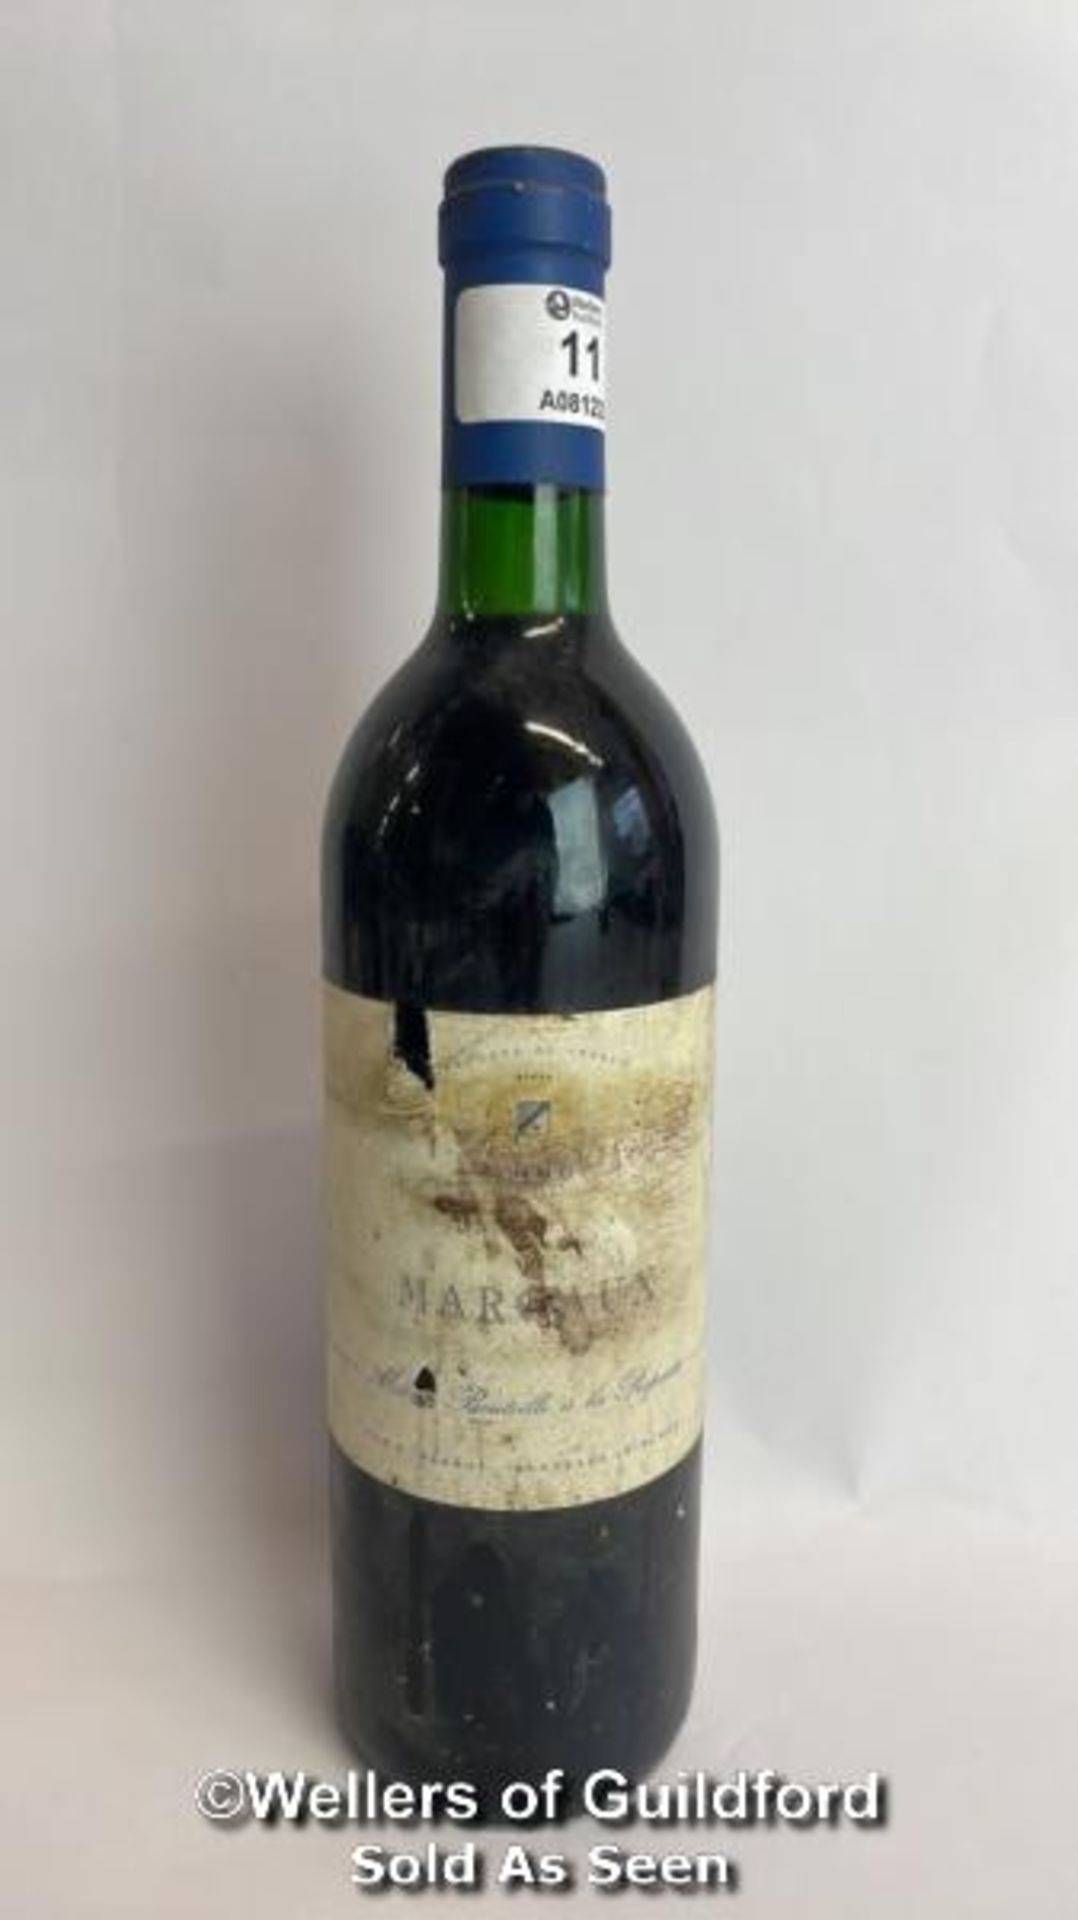 1990 Margaux Par E Parrot Bordeaux (Gironde), 75cl, 12% vol / Please see images for fill level and - Image 2 of 12